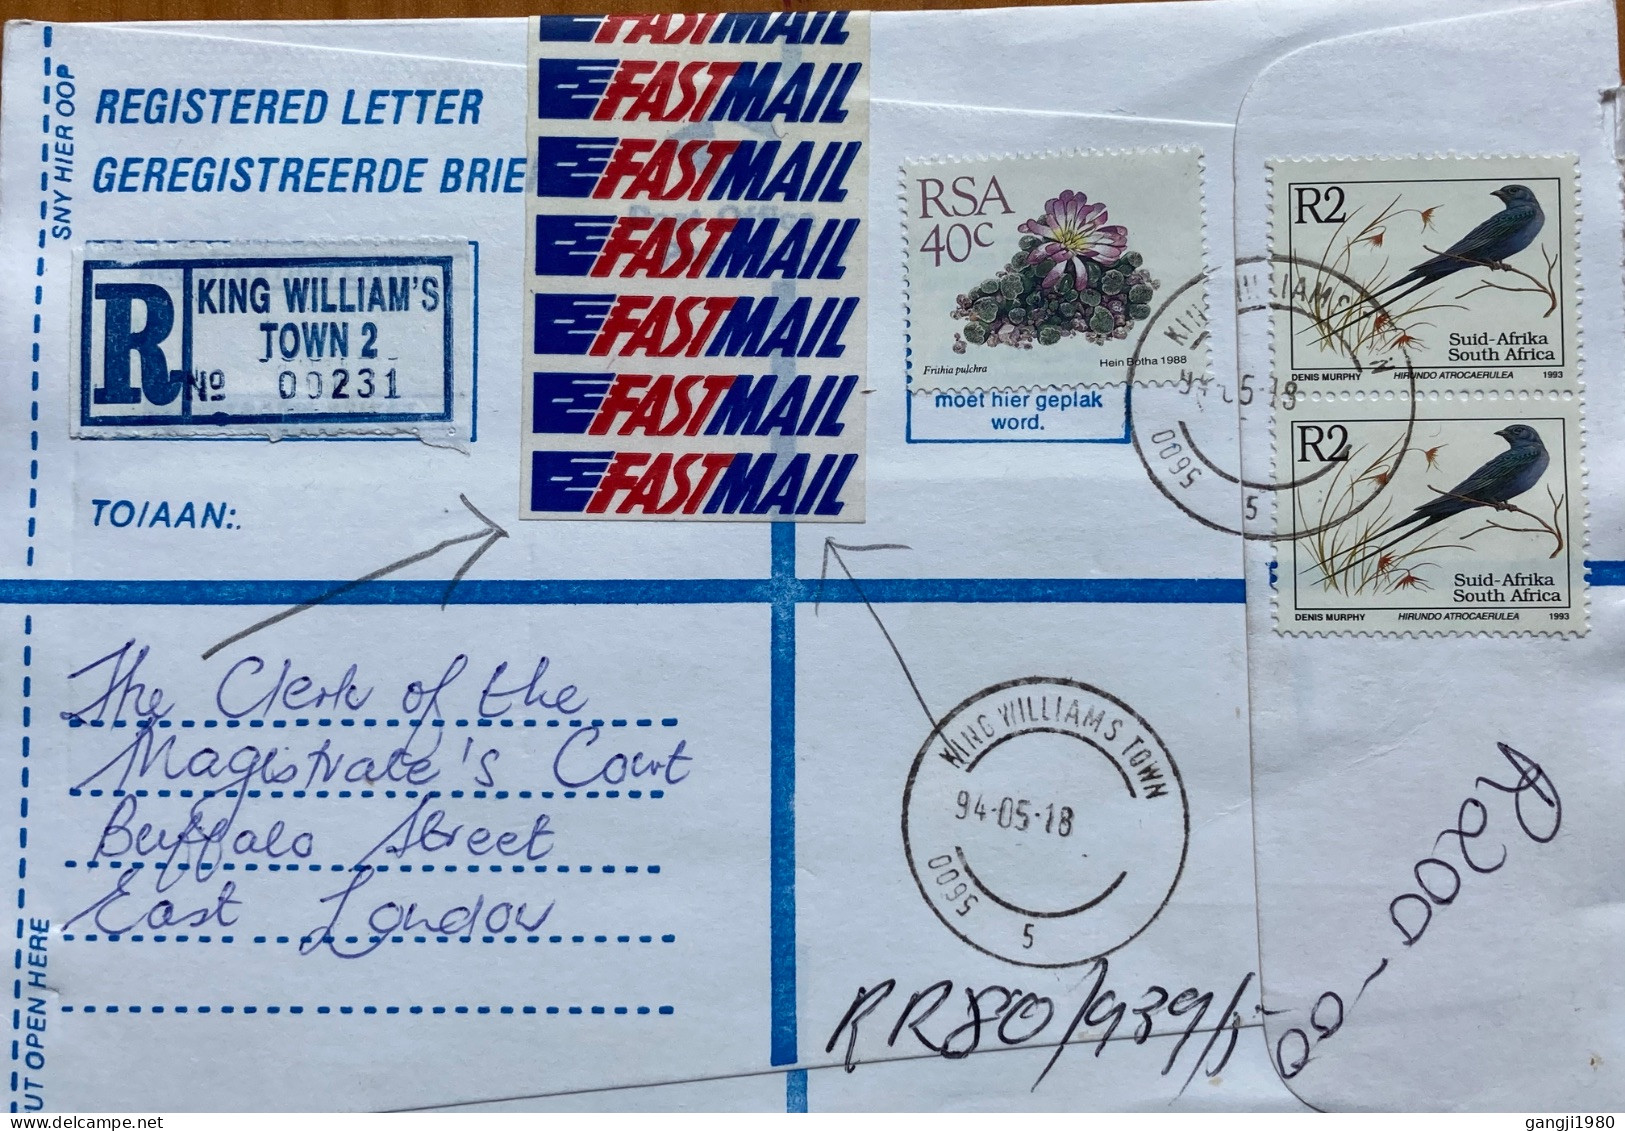 SOUTH AFRICA-1994, REGISTER STATIONERY, COVER USED, 3 SIDE OPEN, VIGNETTE FASTMAIL LABEL, BIRD & FLOWER, KING WILLIAM'S - Covers & Documents